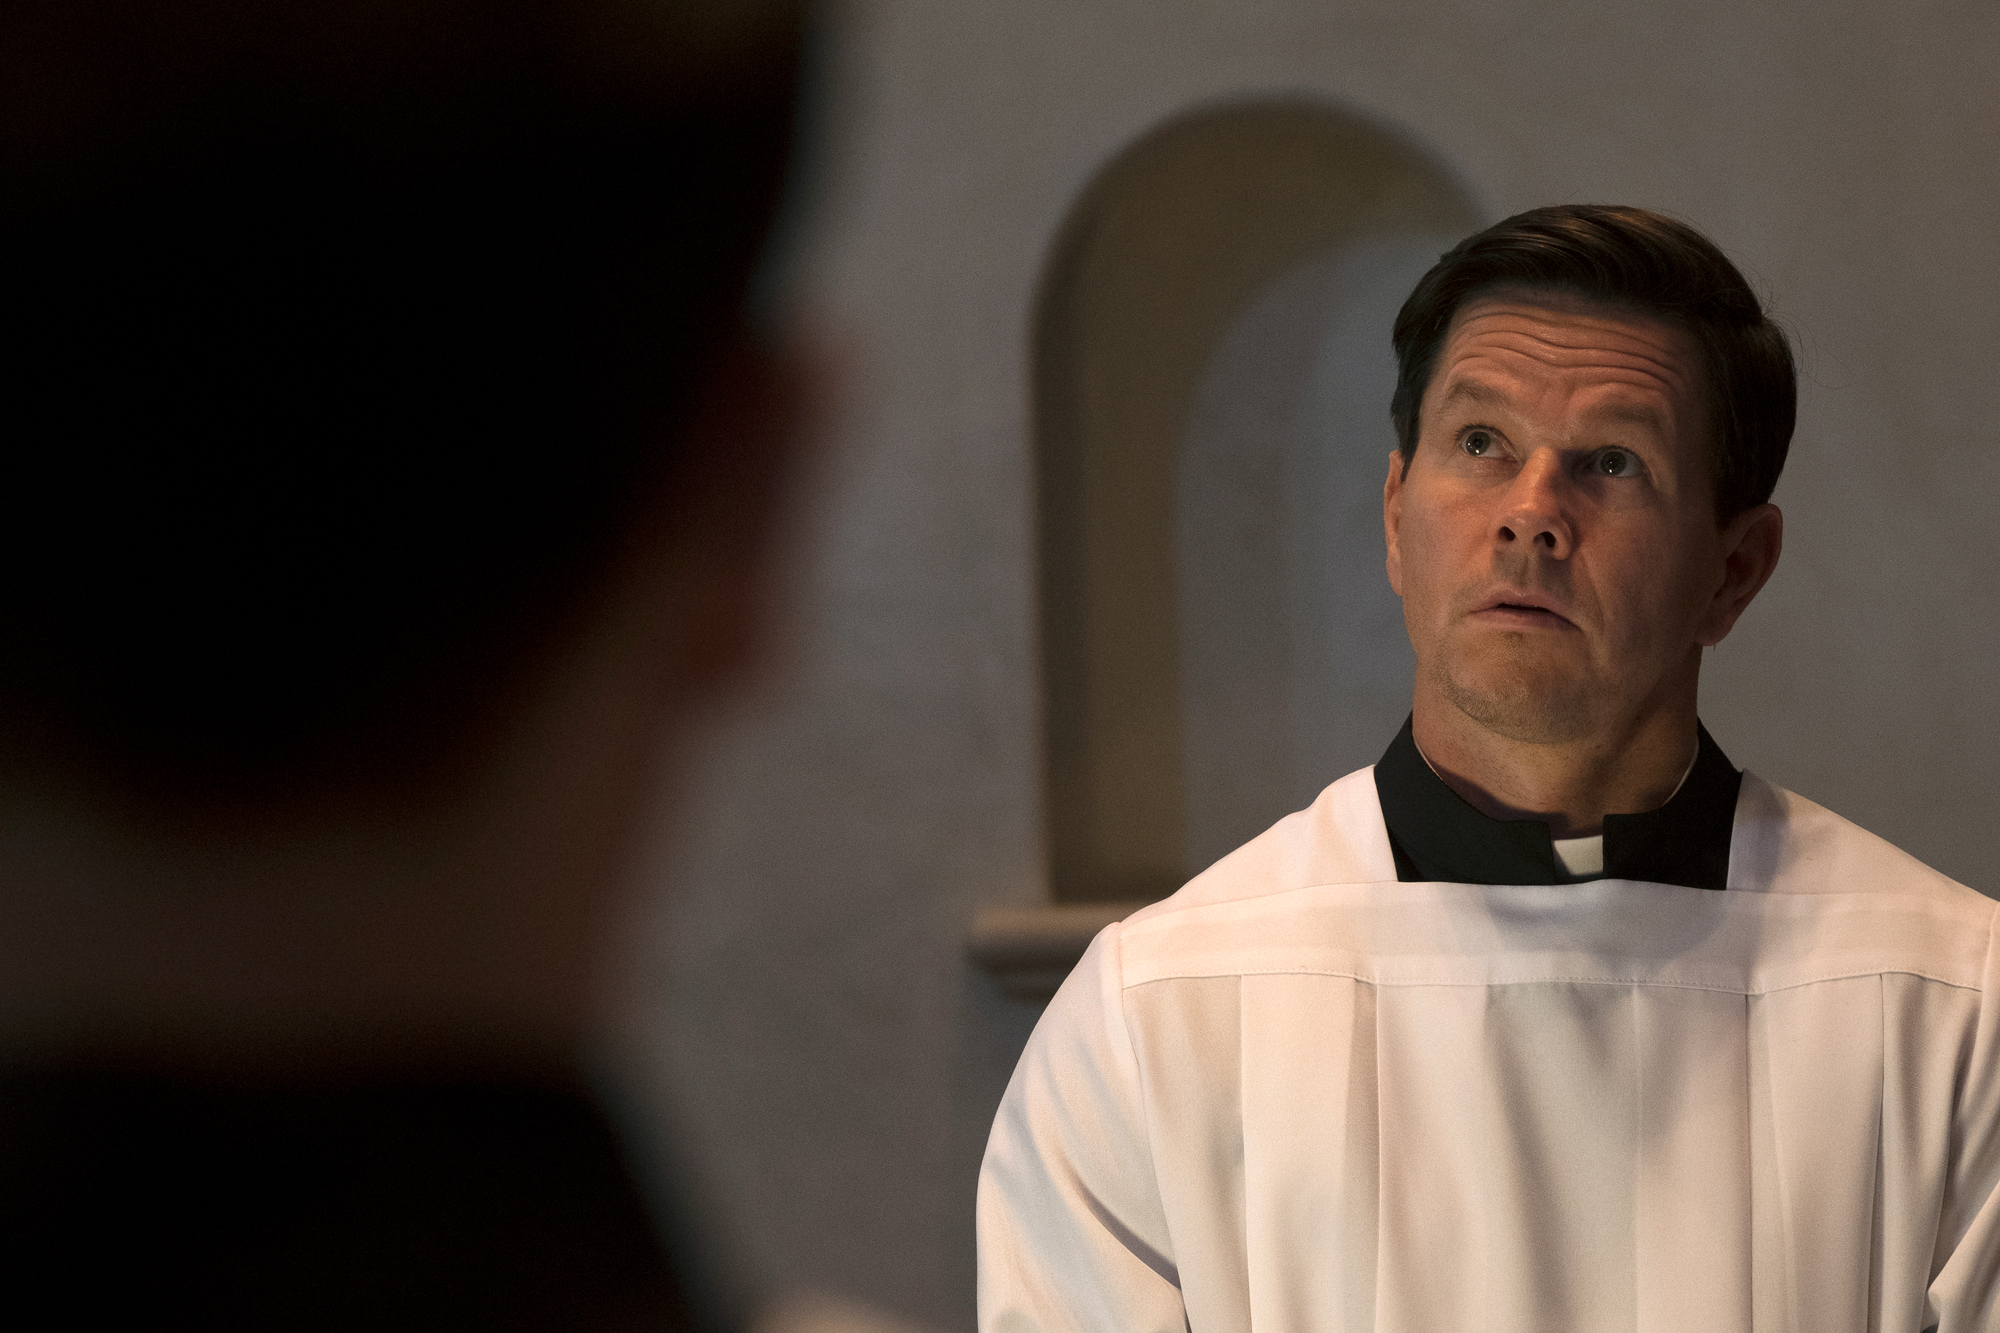 Wahlberg and Gibson We hope Catholic movie opens hearts Universe